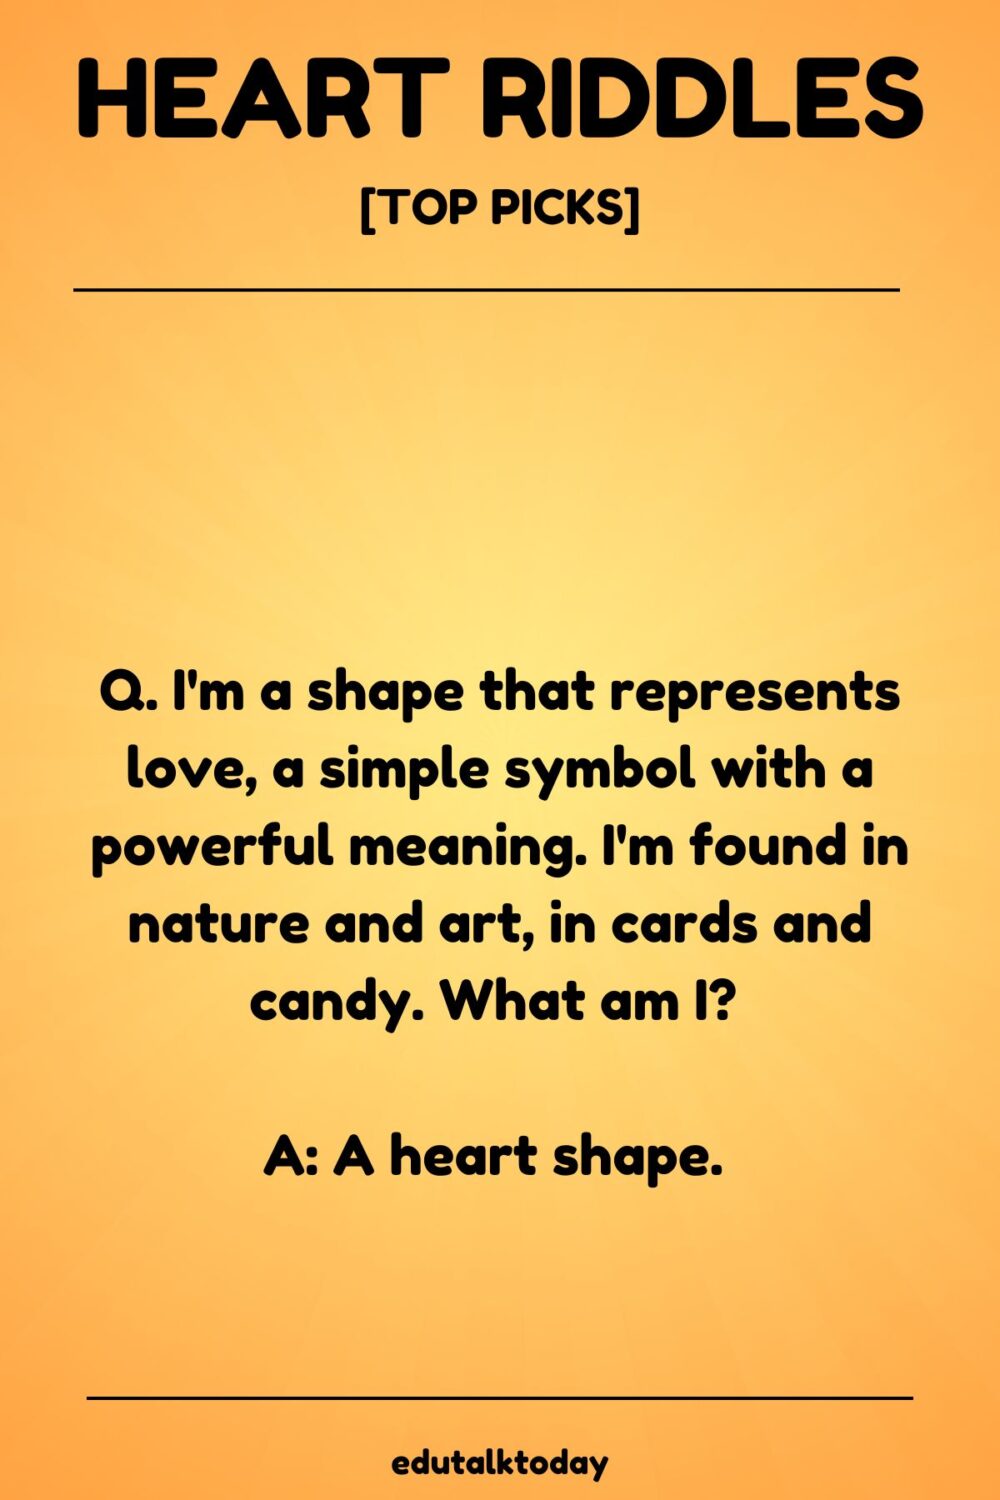 30 Heart Riddles with Answers